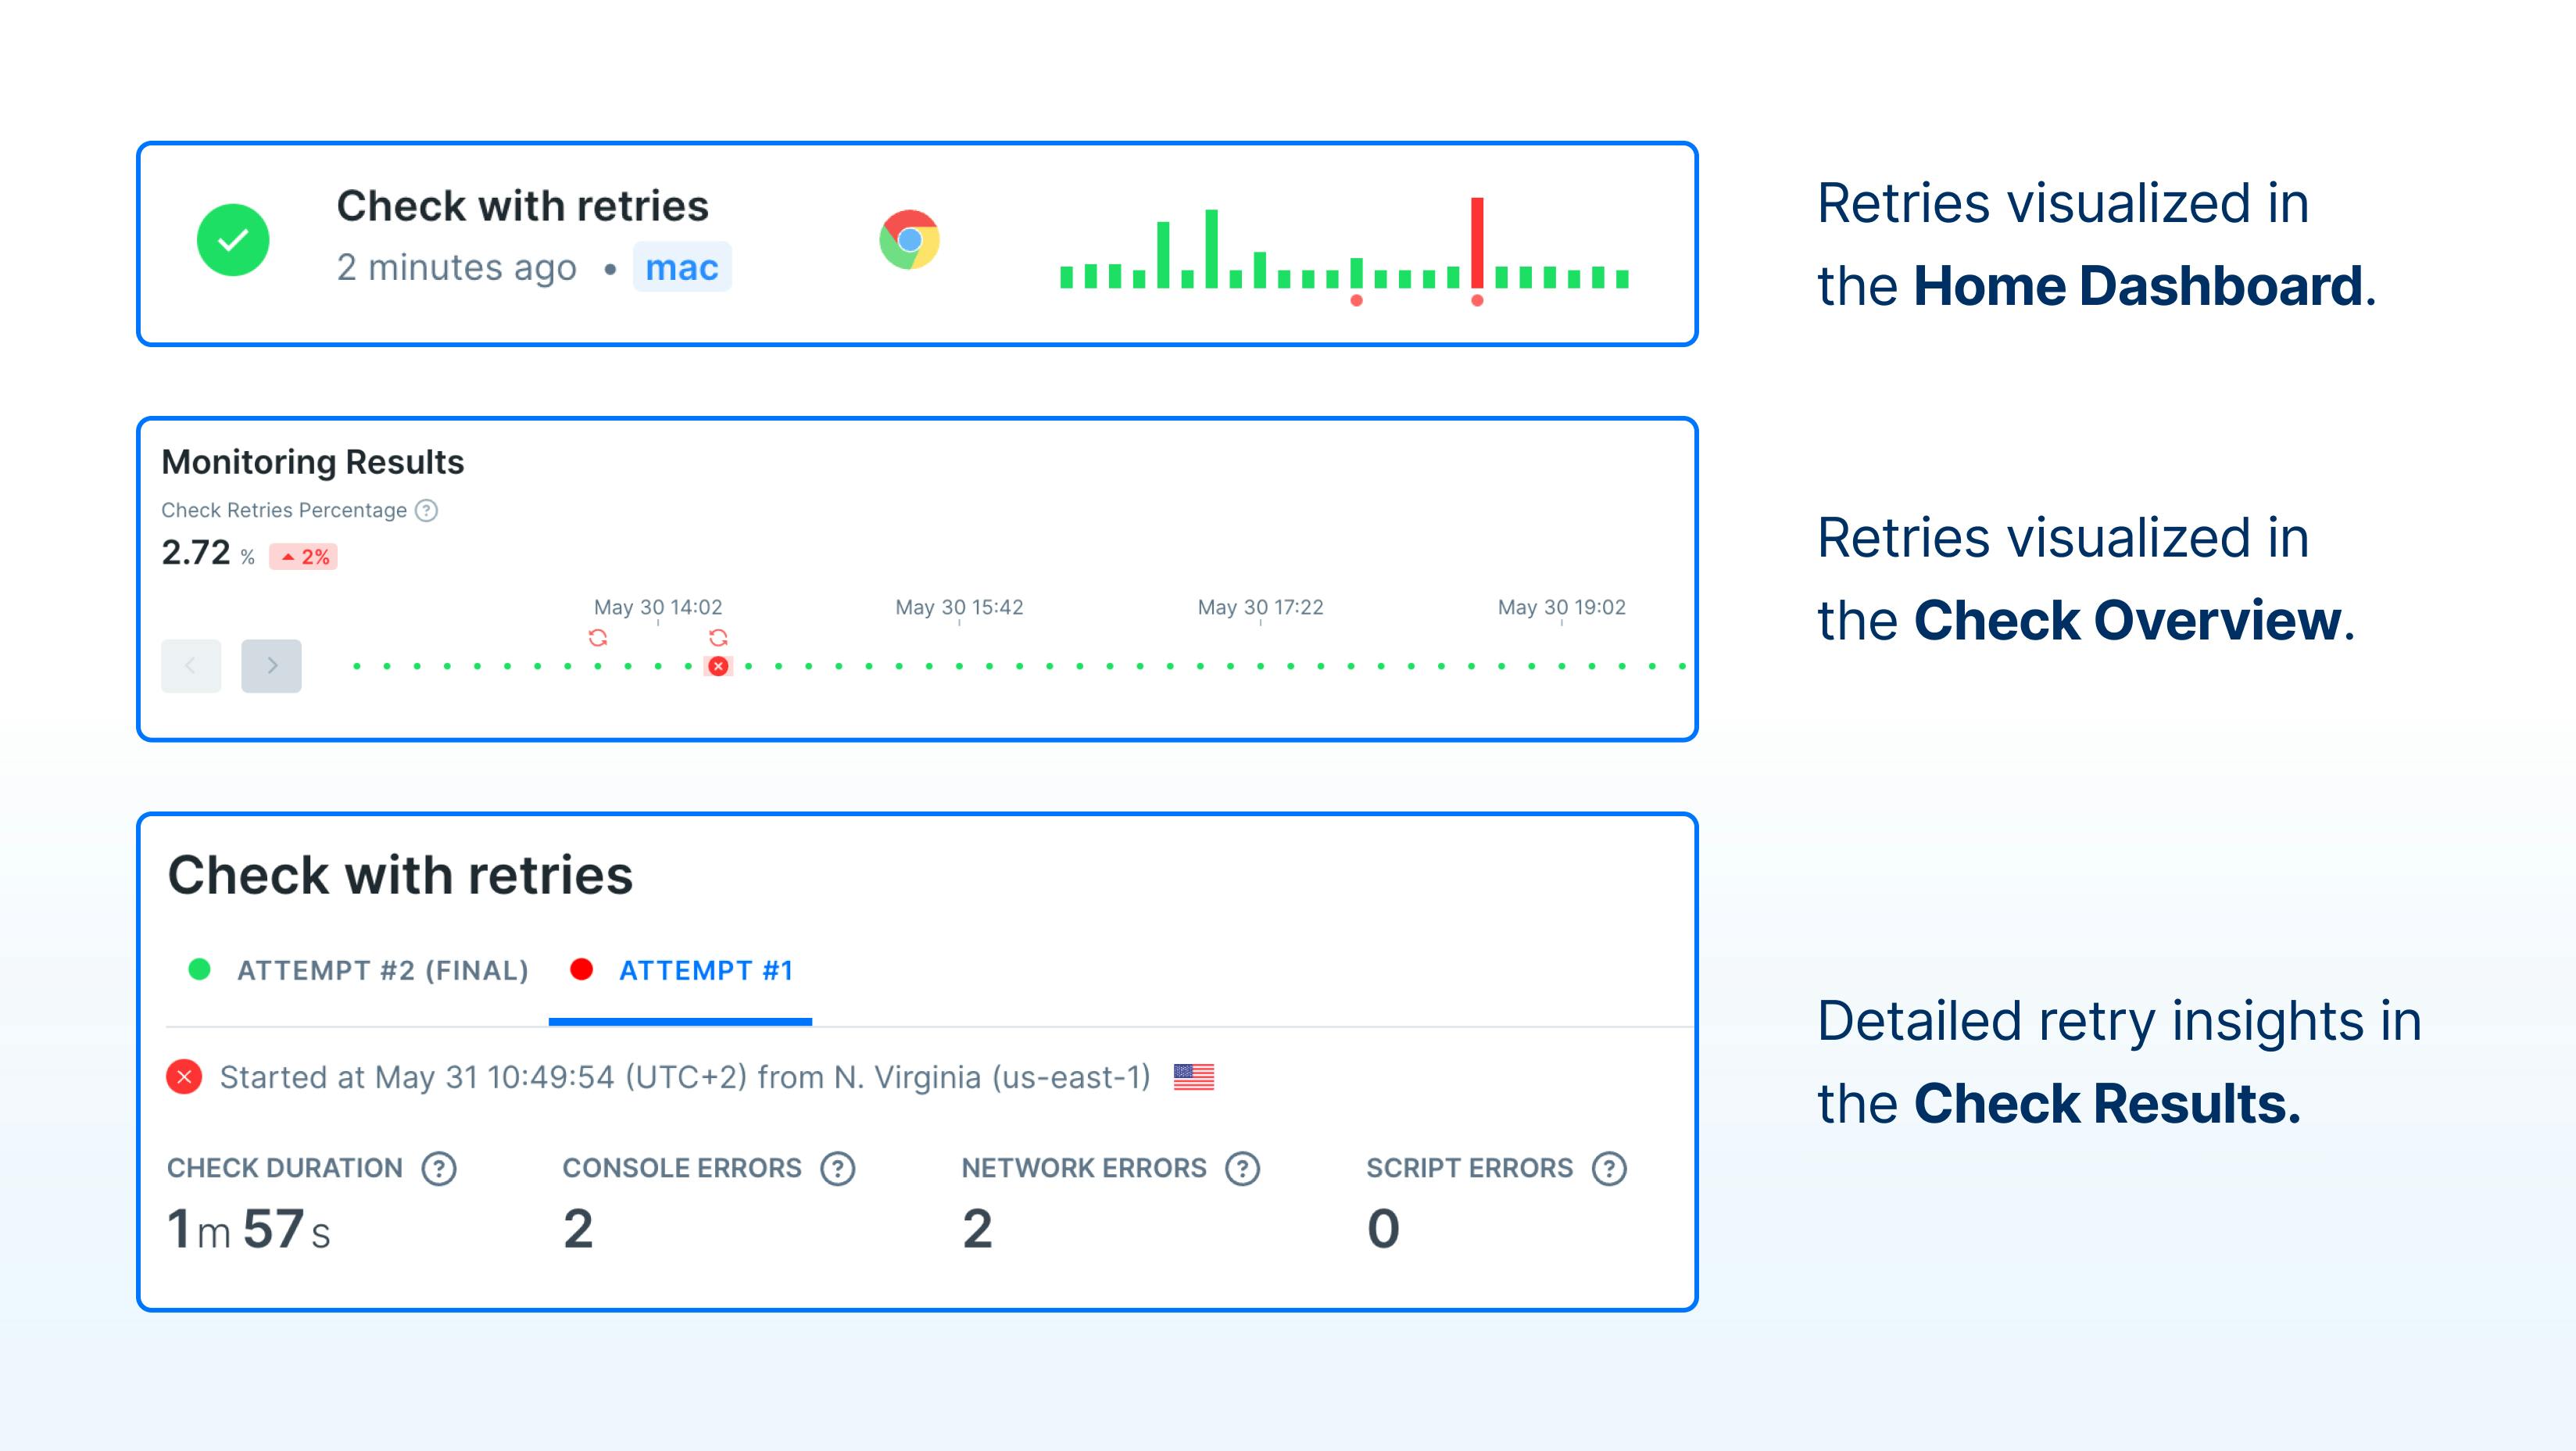 Retries visualized in Home Dashboard, Check Overview and Check results.